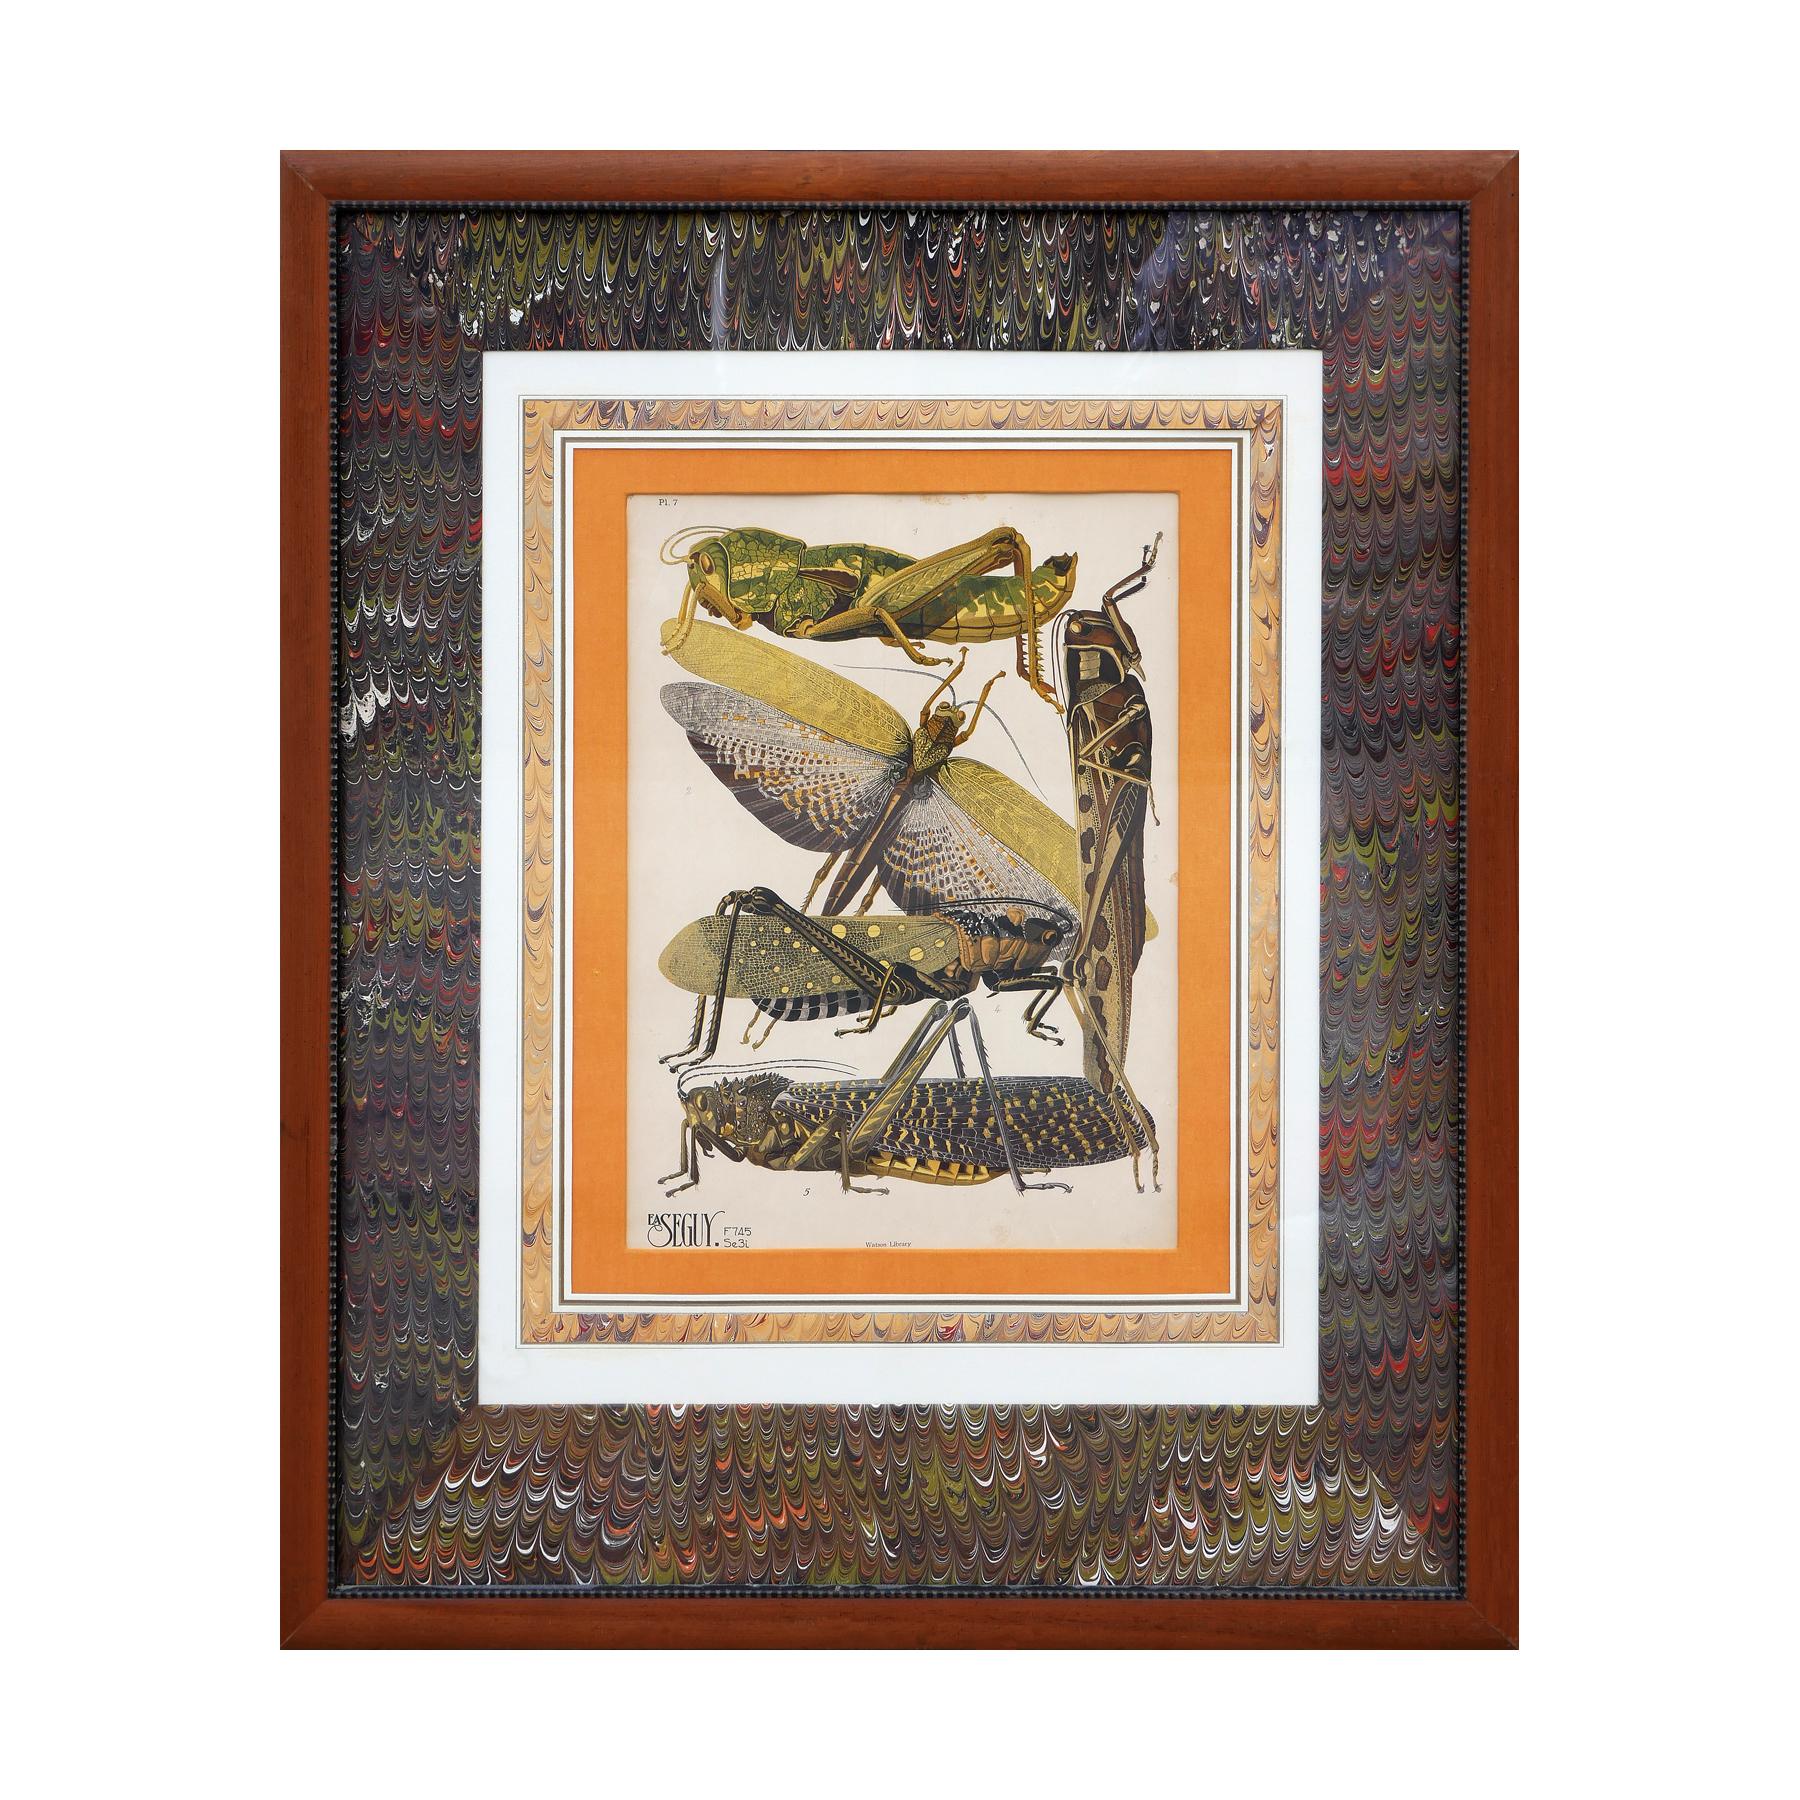 Twentieth-Century earth-toned naturalistic pochoir print by E.A. Séguy. The print depicts a naturalistic rendering of insects namely: a snakeweed grasshopper, an American grasshopper, an Aularch, a female Carolina grasshopper, and a black and yellow